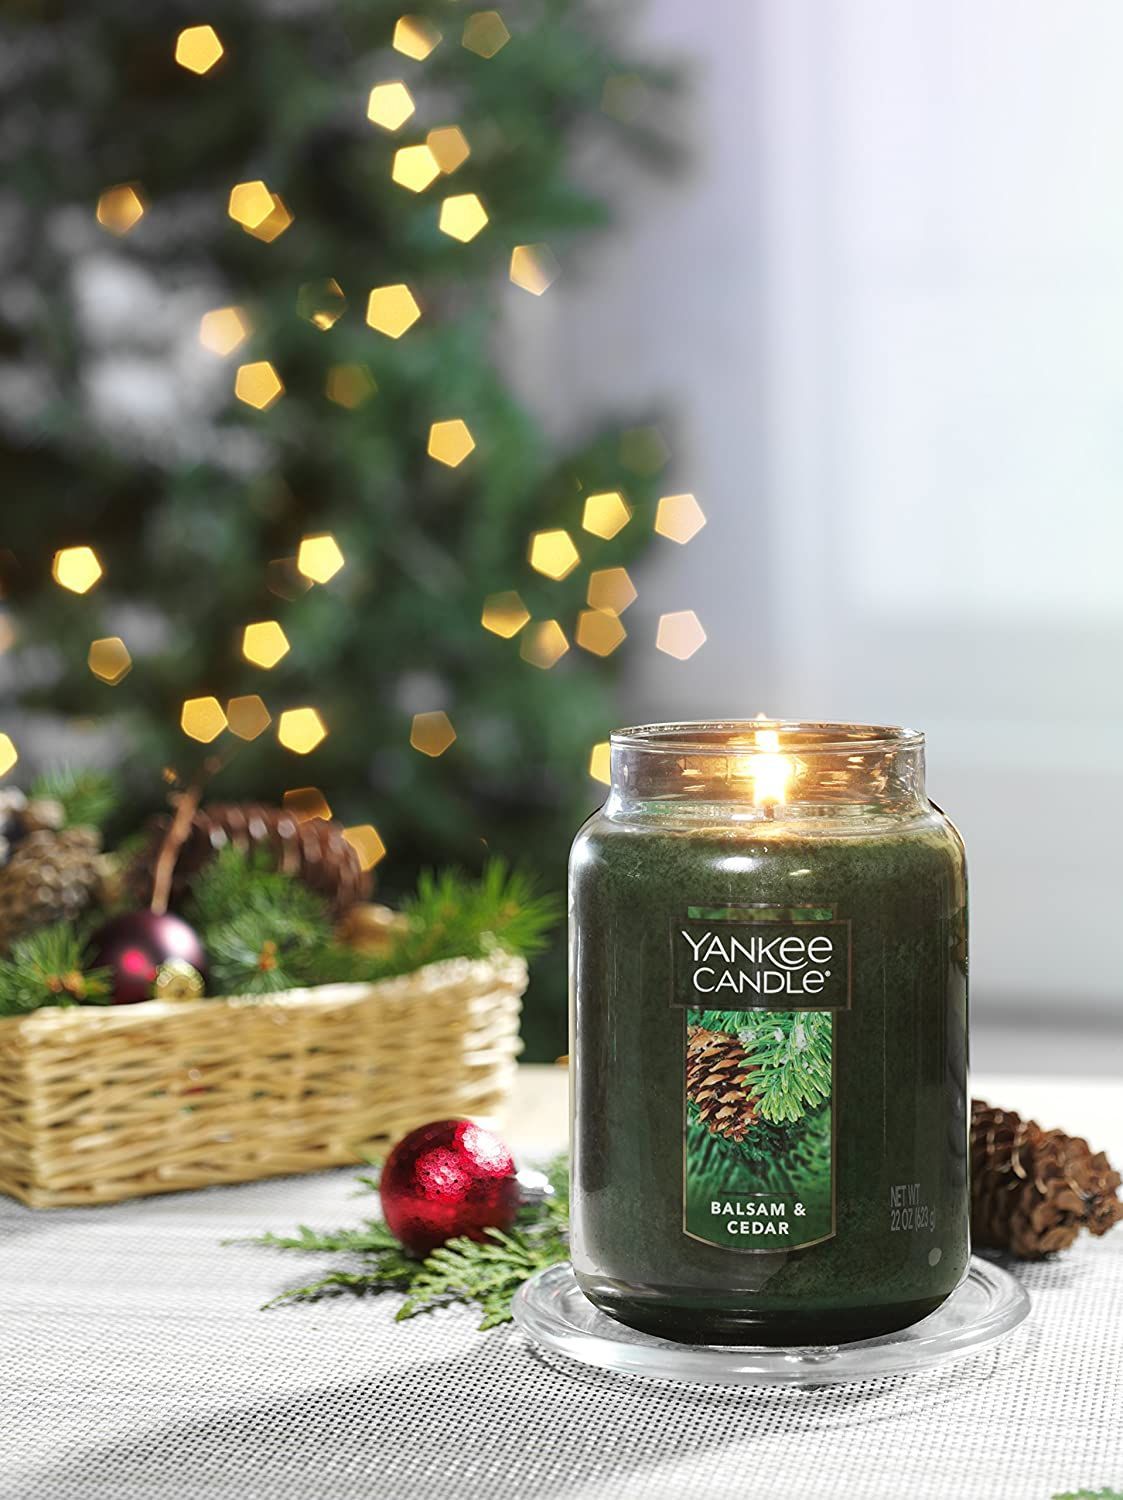 Vintage Holiday Candle - Scented Holiday Candle, Scents of pine